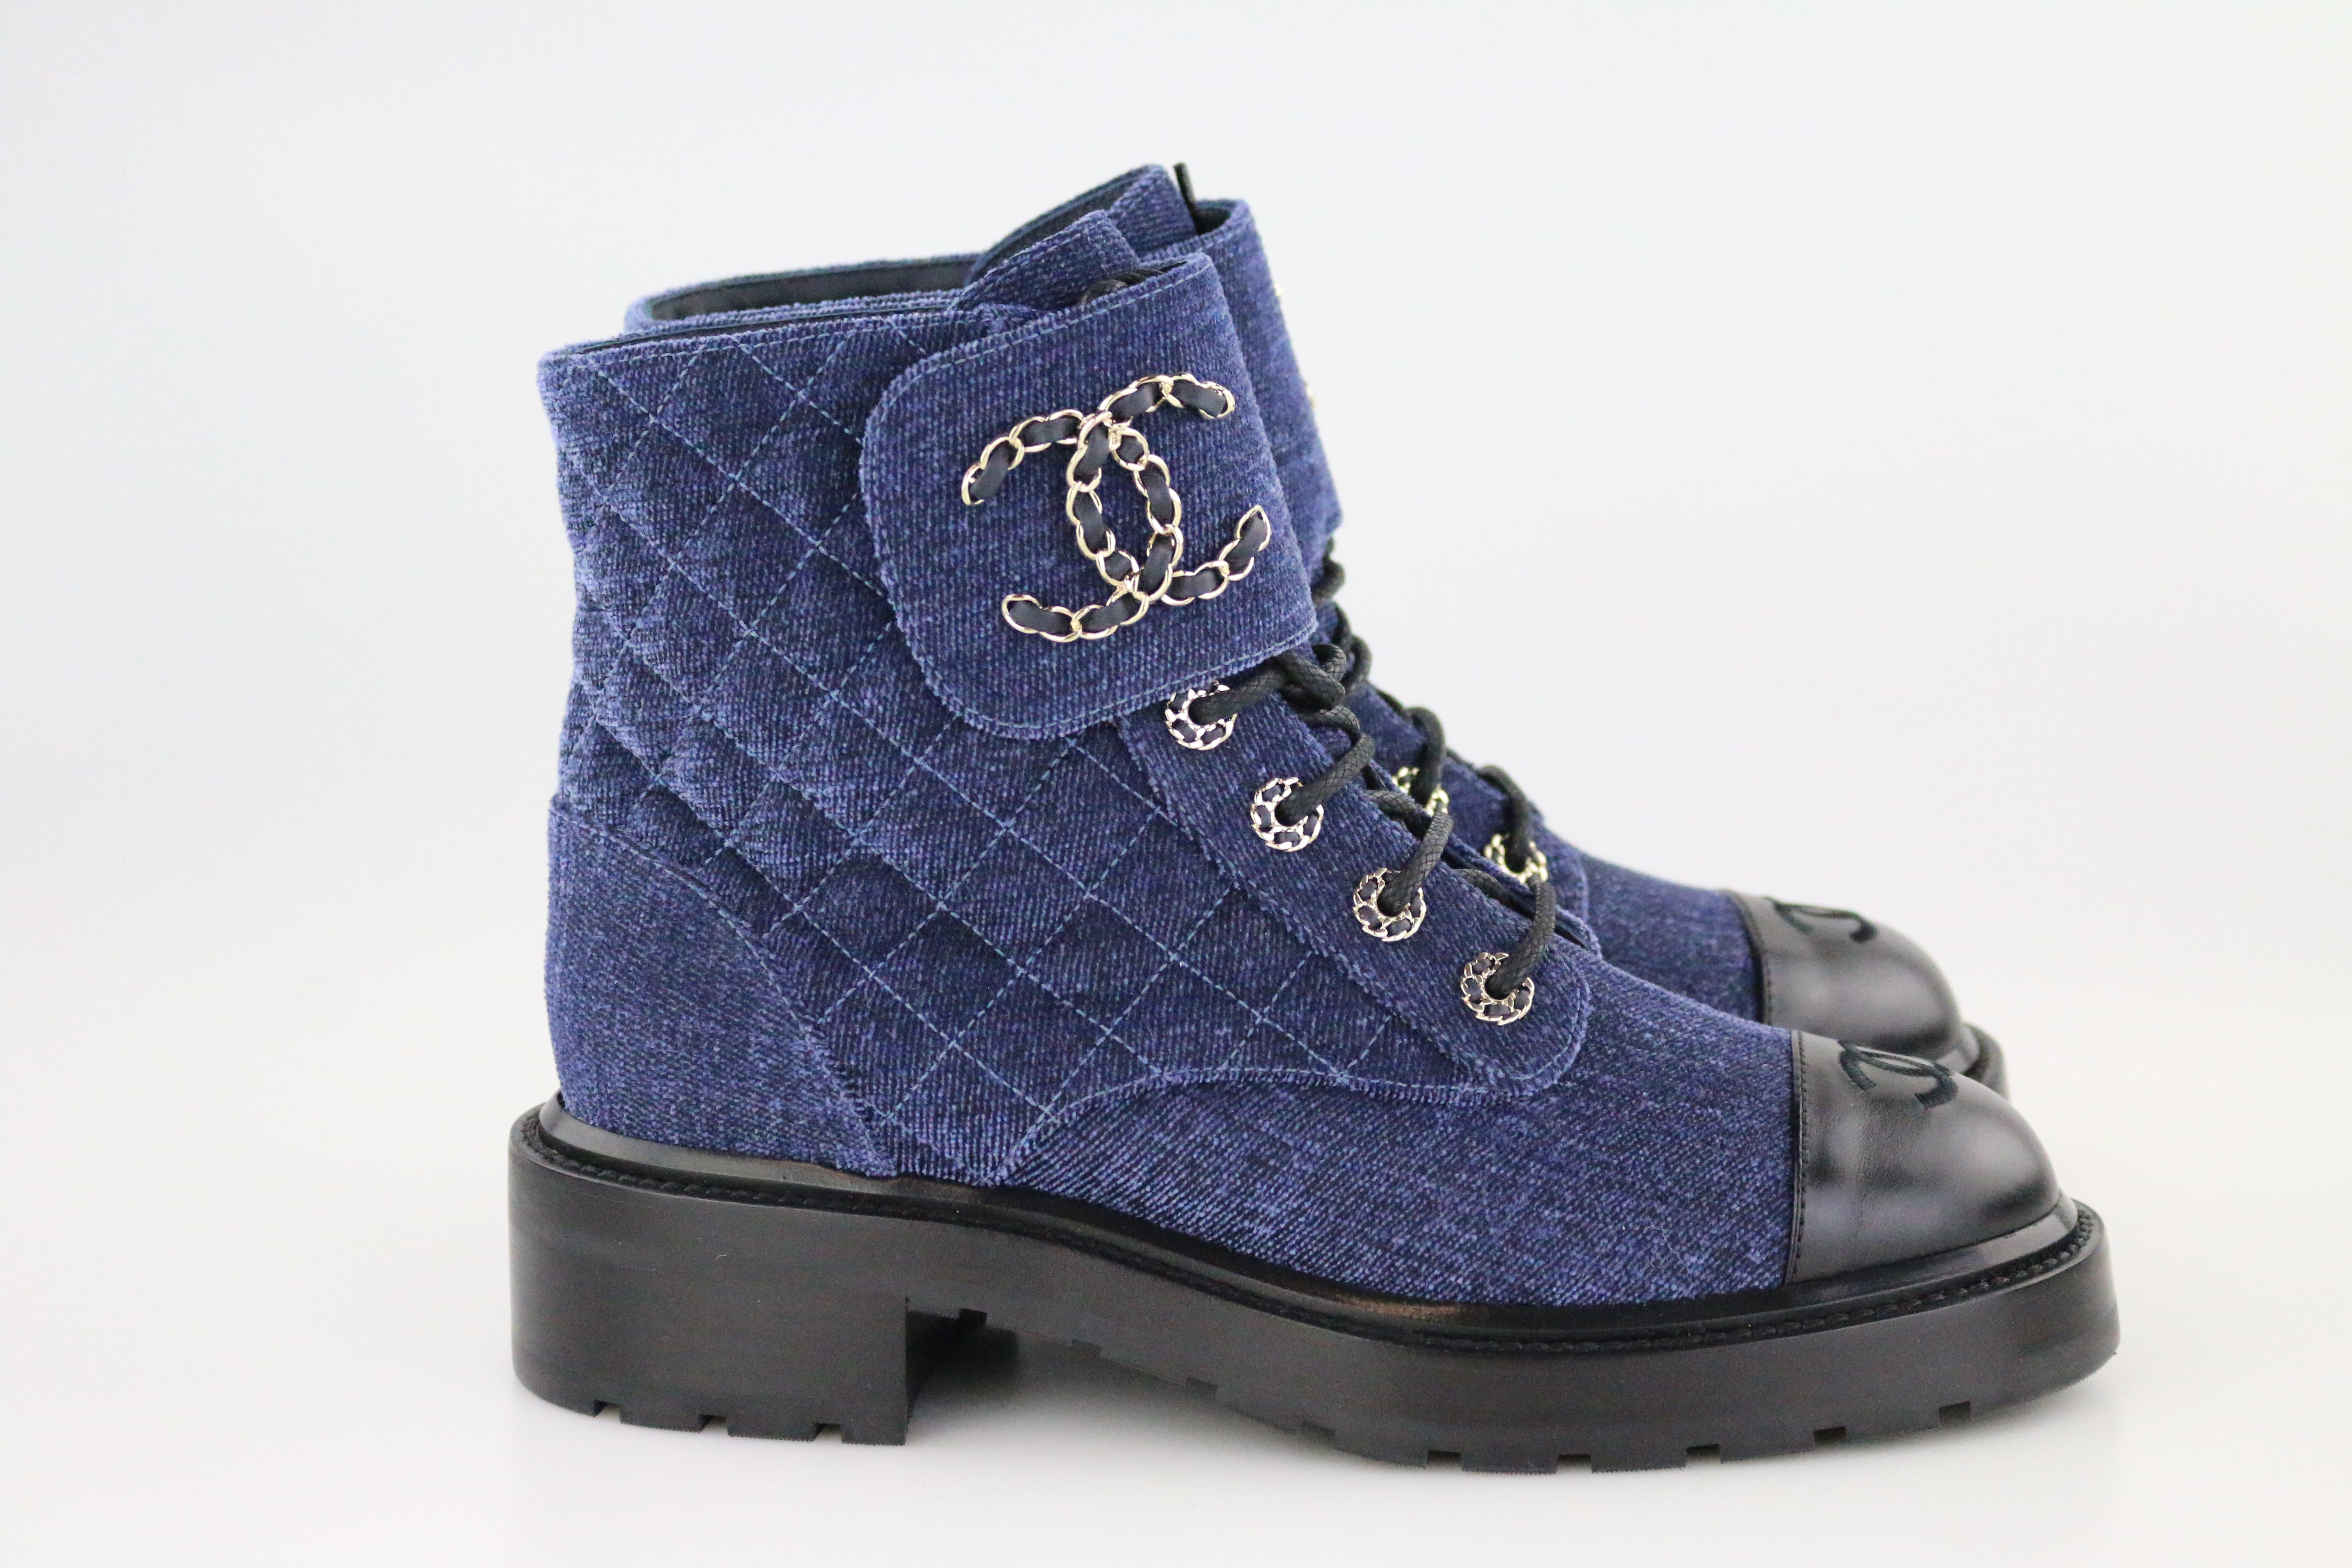 Chanel Authenticated Boots